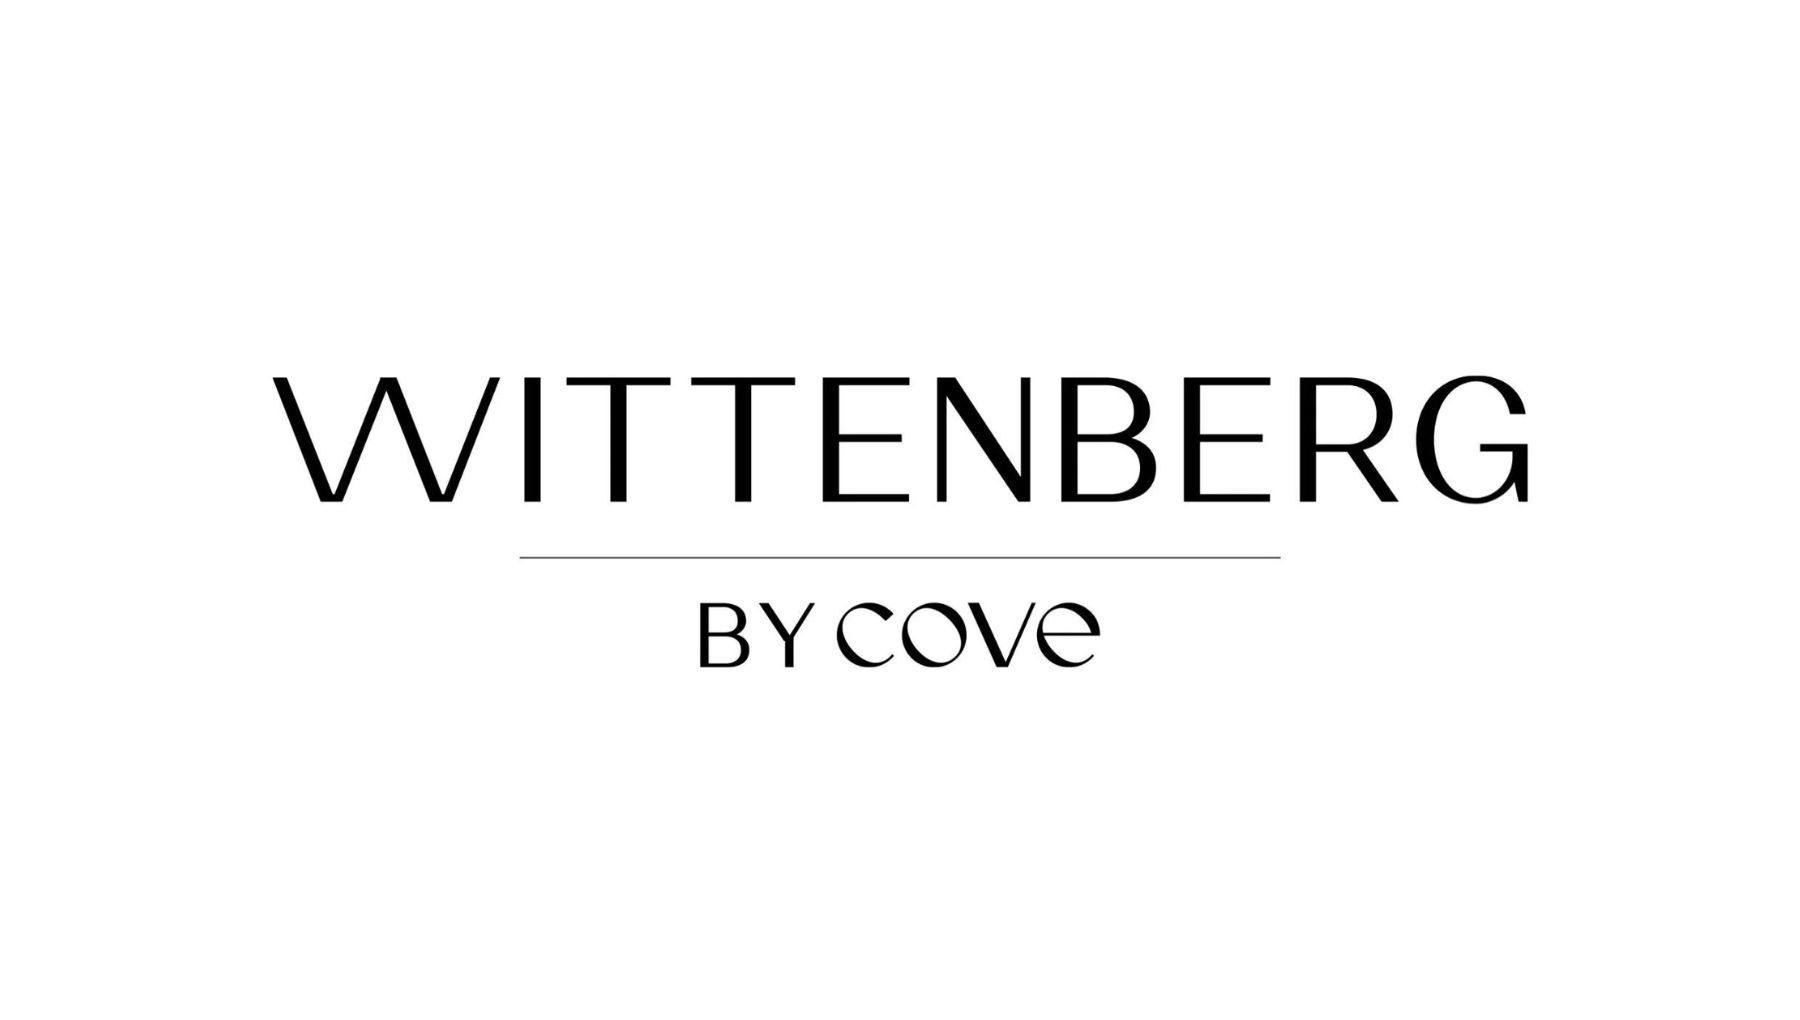 Wittenberg by Cove